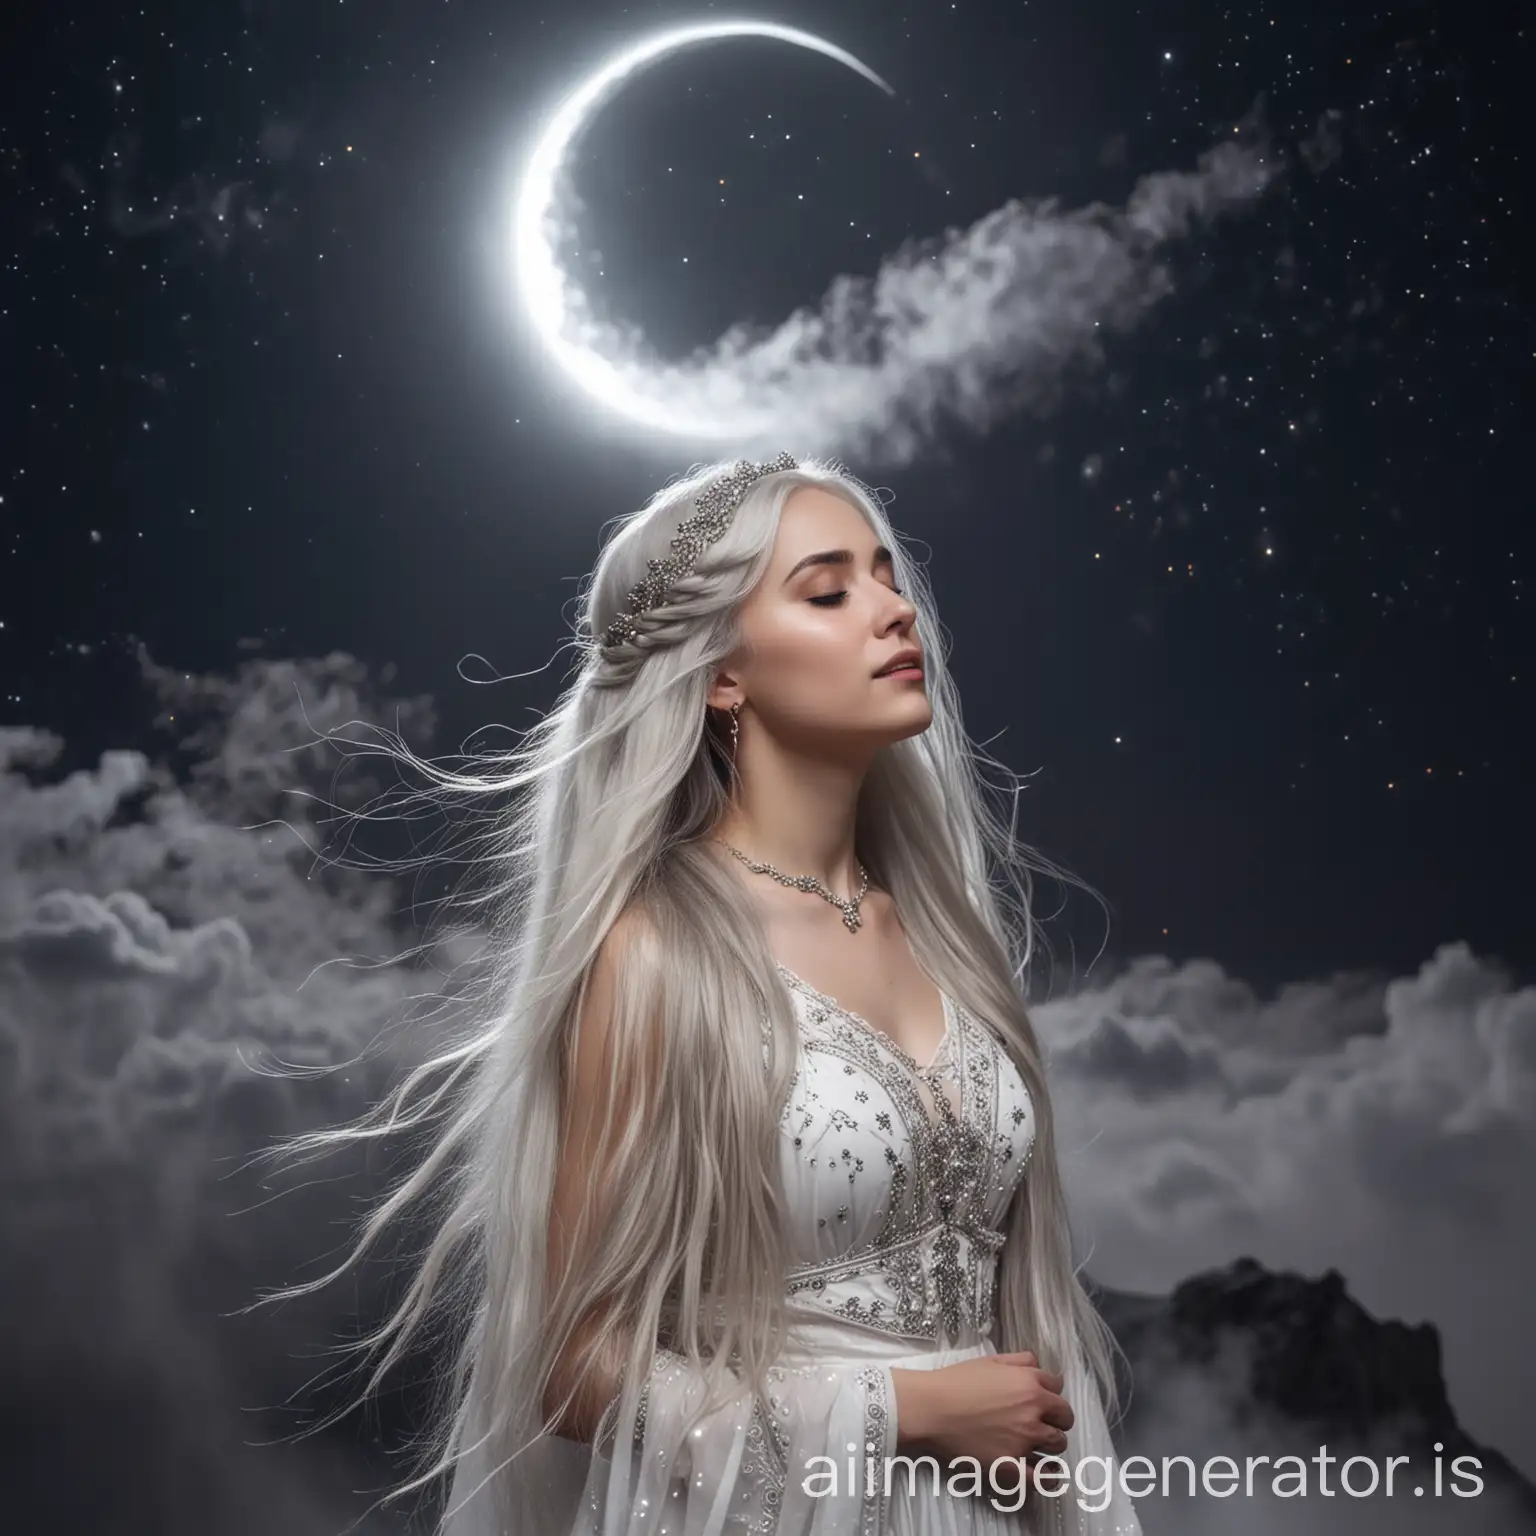 woman body, visible navel and shoulders, standing under bright crescent moon, tiara, long braids, stars, clouds in the dark sky, very long white hair, fog, steam, montains in background, close view